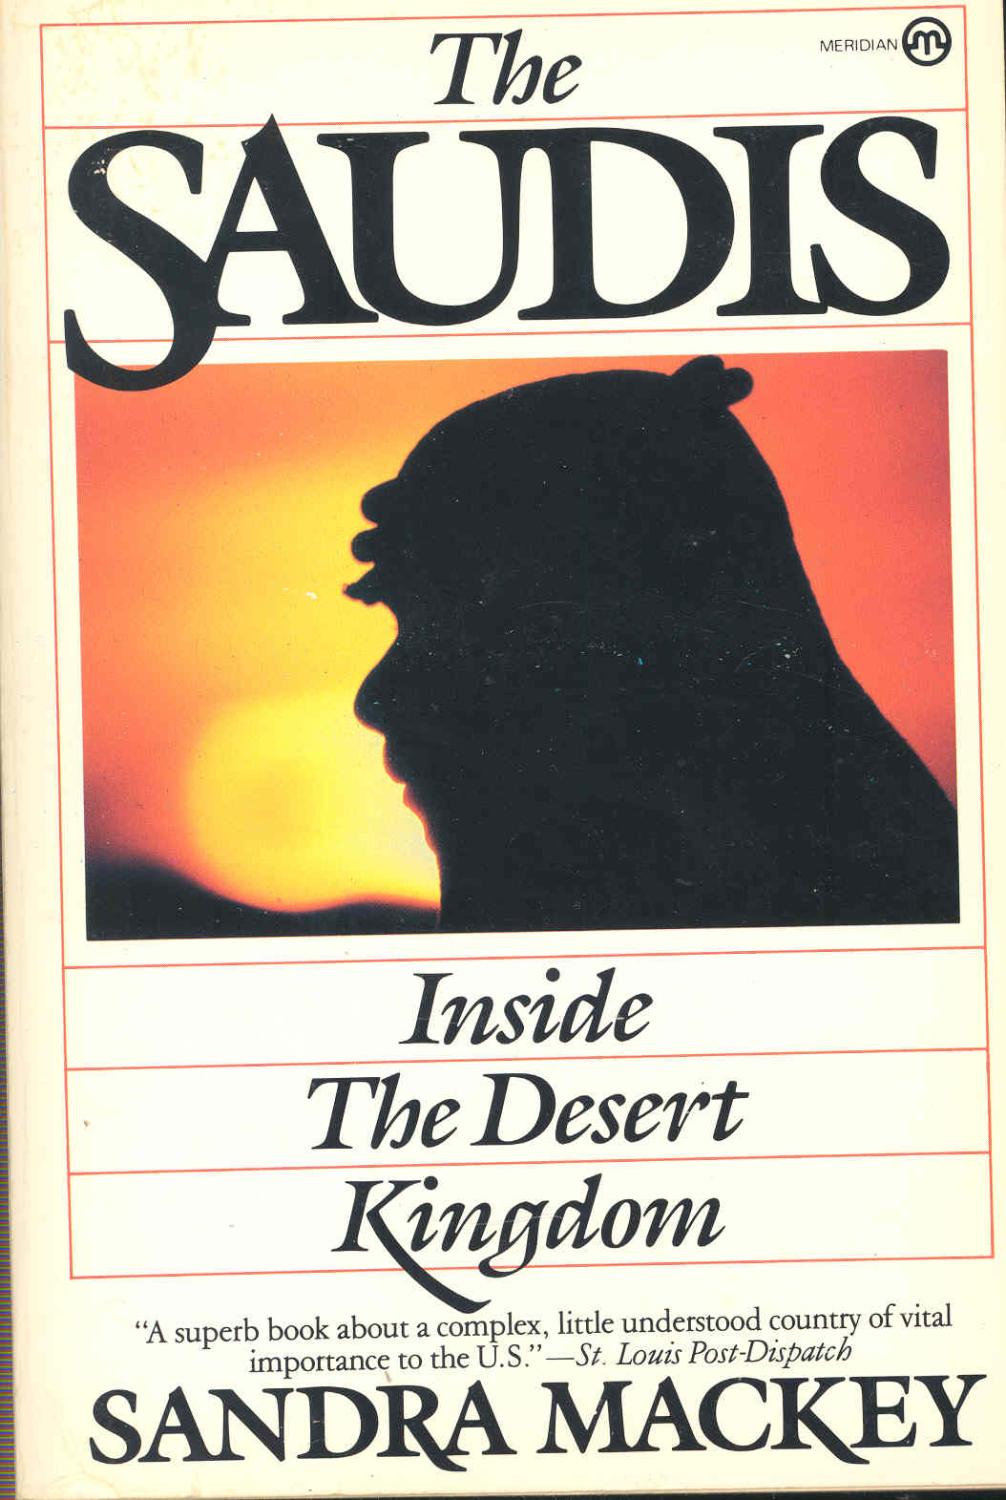 The Saudis : inside the desert kingdom. [The oil boom, 1974-1980 -- The coming of a foreigner -- The Magic Kingdom -- Managing the boom -- Servants of God -- Living with Islam -- Bedouin pride -- The shackles of sex -- Mysteries of the hareem -- Putting Saudis to work -- The royal tribe -- There was no tomorrow -- The twilight, 1980 and beyond -- The press : Pride and denial -- Jail : a clear and present danger -- Swords and missiles : the search for security -- The world creeps closer -- The new realities -- Castles of sand -- Stalled between seasons] - Mackey, Sandra, 1937-